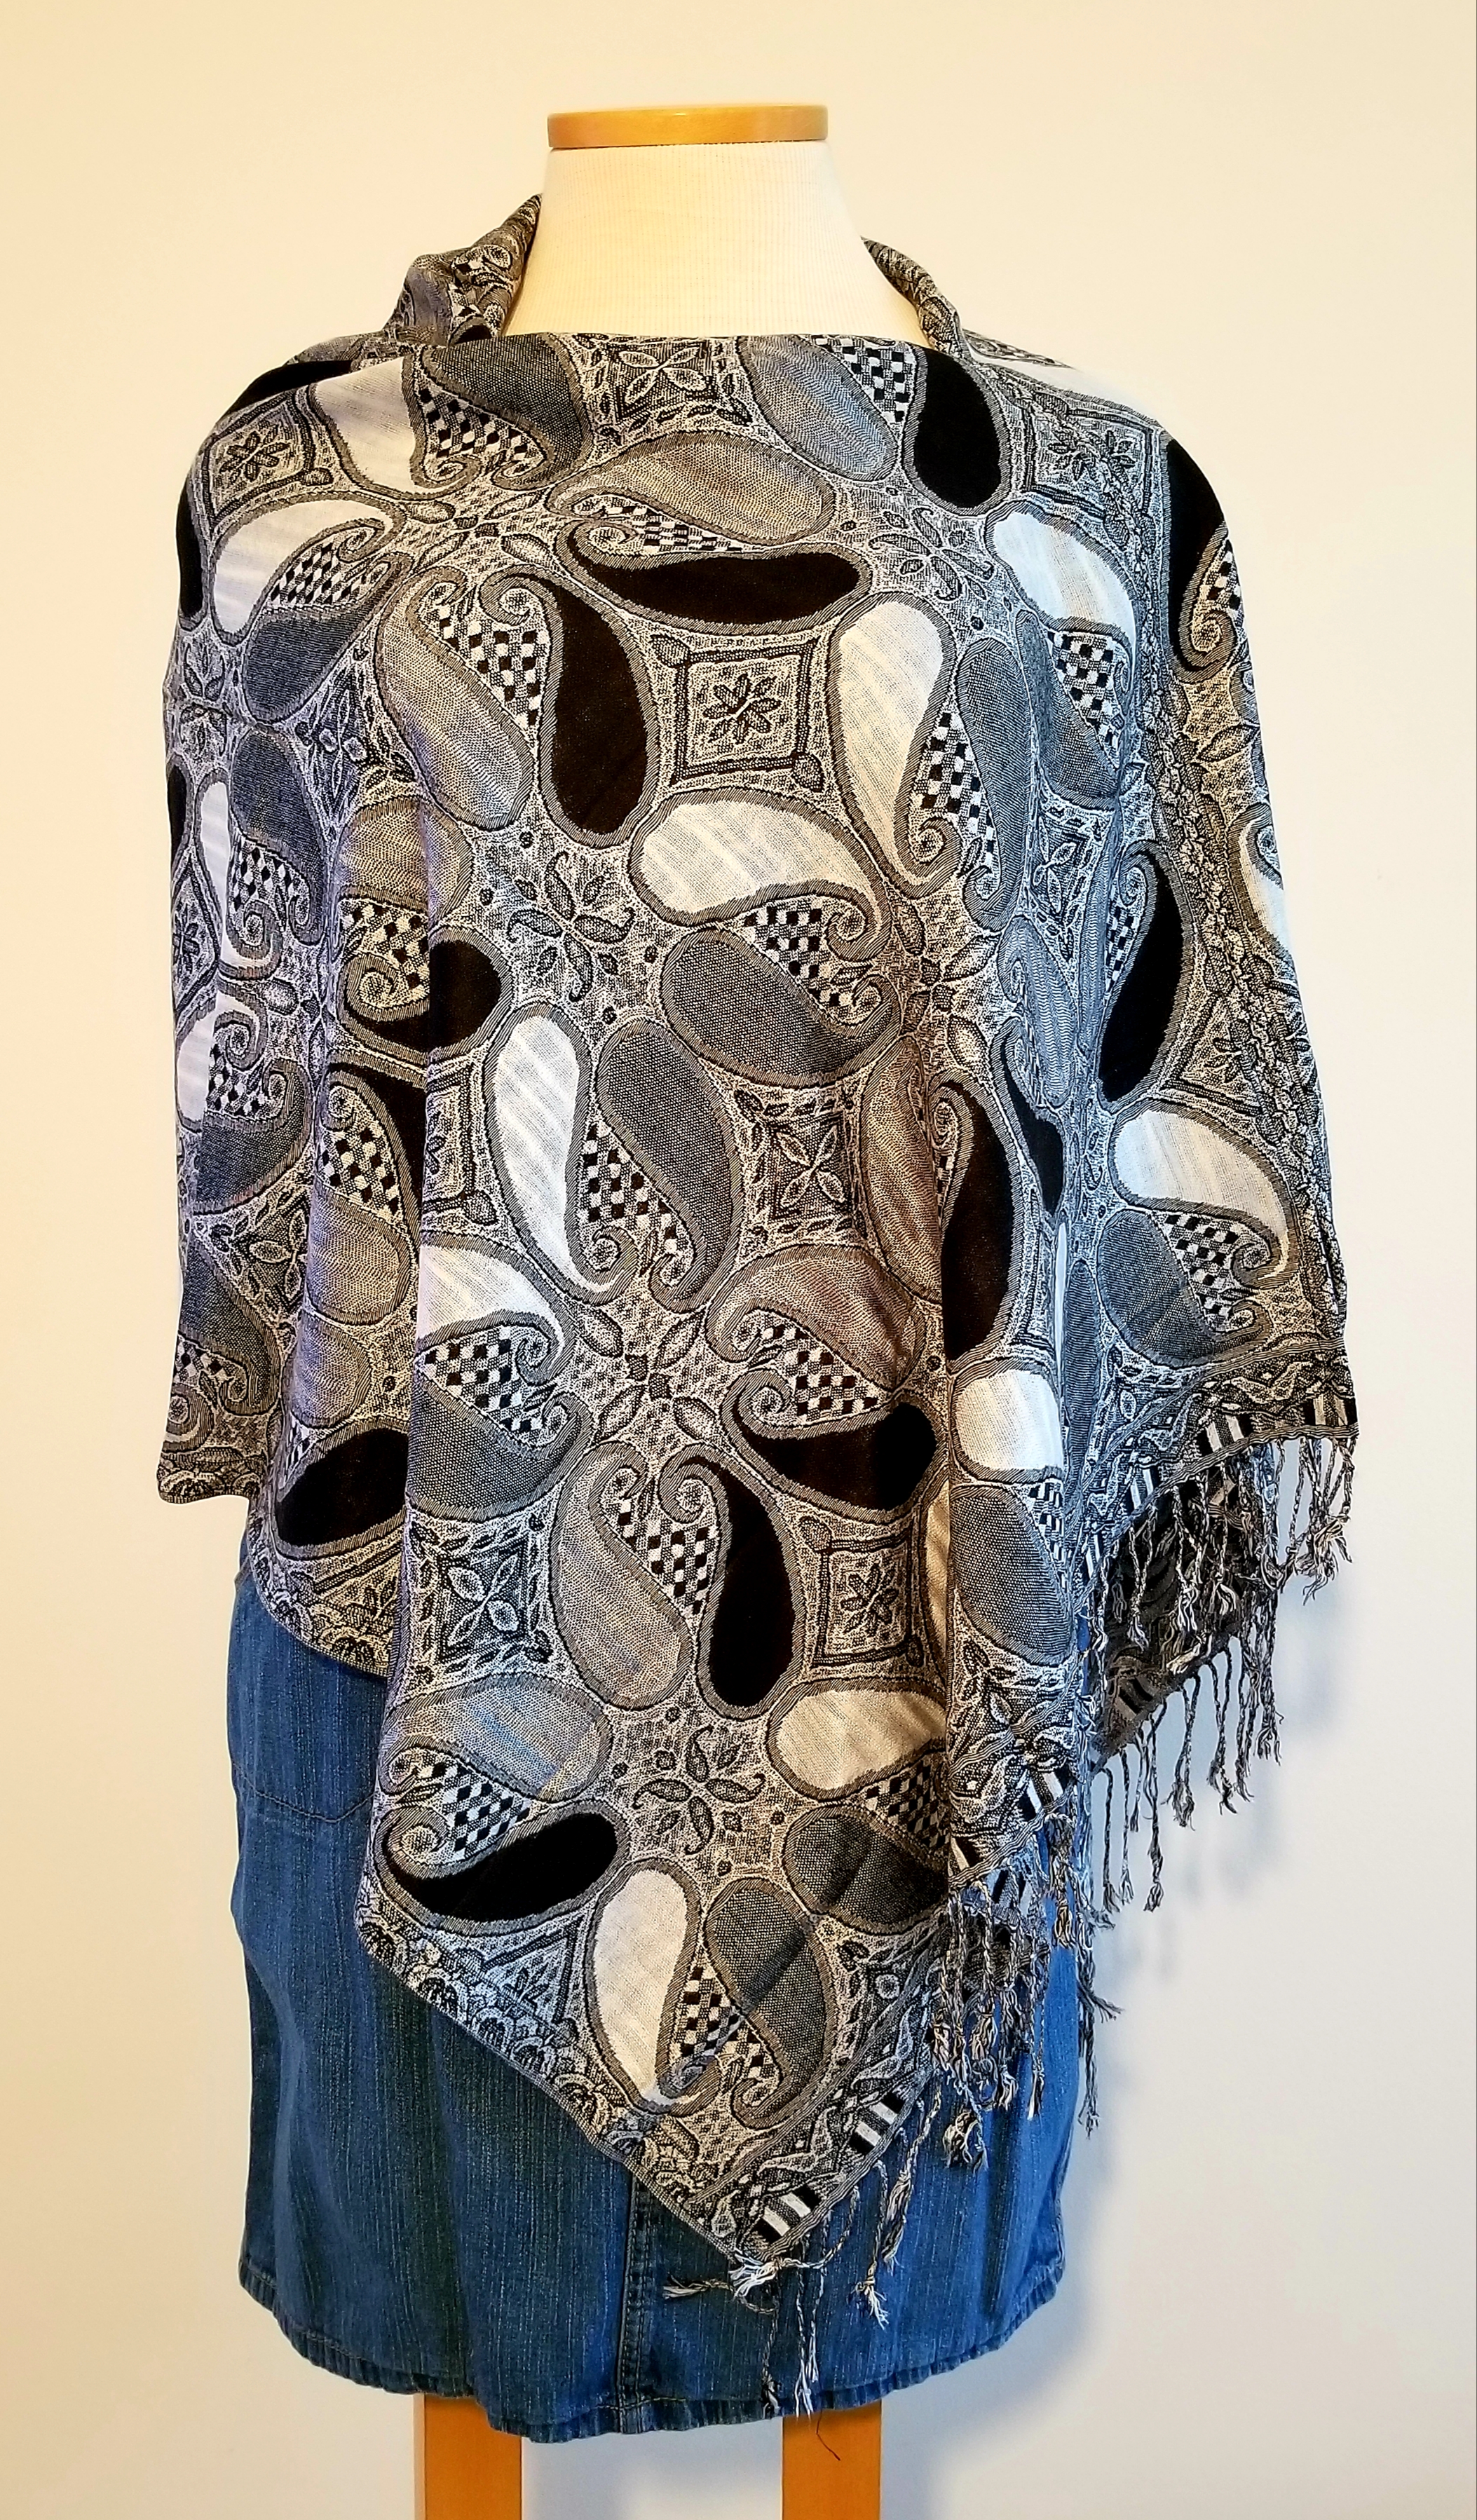 This Black White Silver Gray Modern Print Reversible Popover Shawlmina Shawl- Viscose Silk Blend - Fits most is made with love by The Creative Soul Sisters! Shop more unique gift ideas today with Spots Initiatives, the best way to support creators.